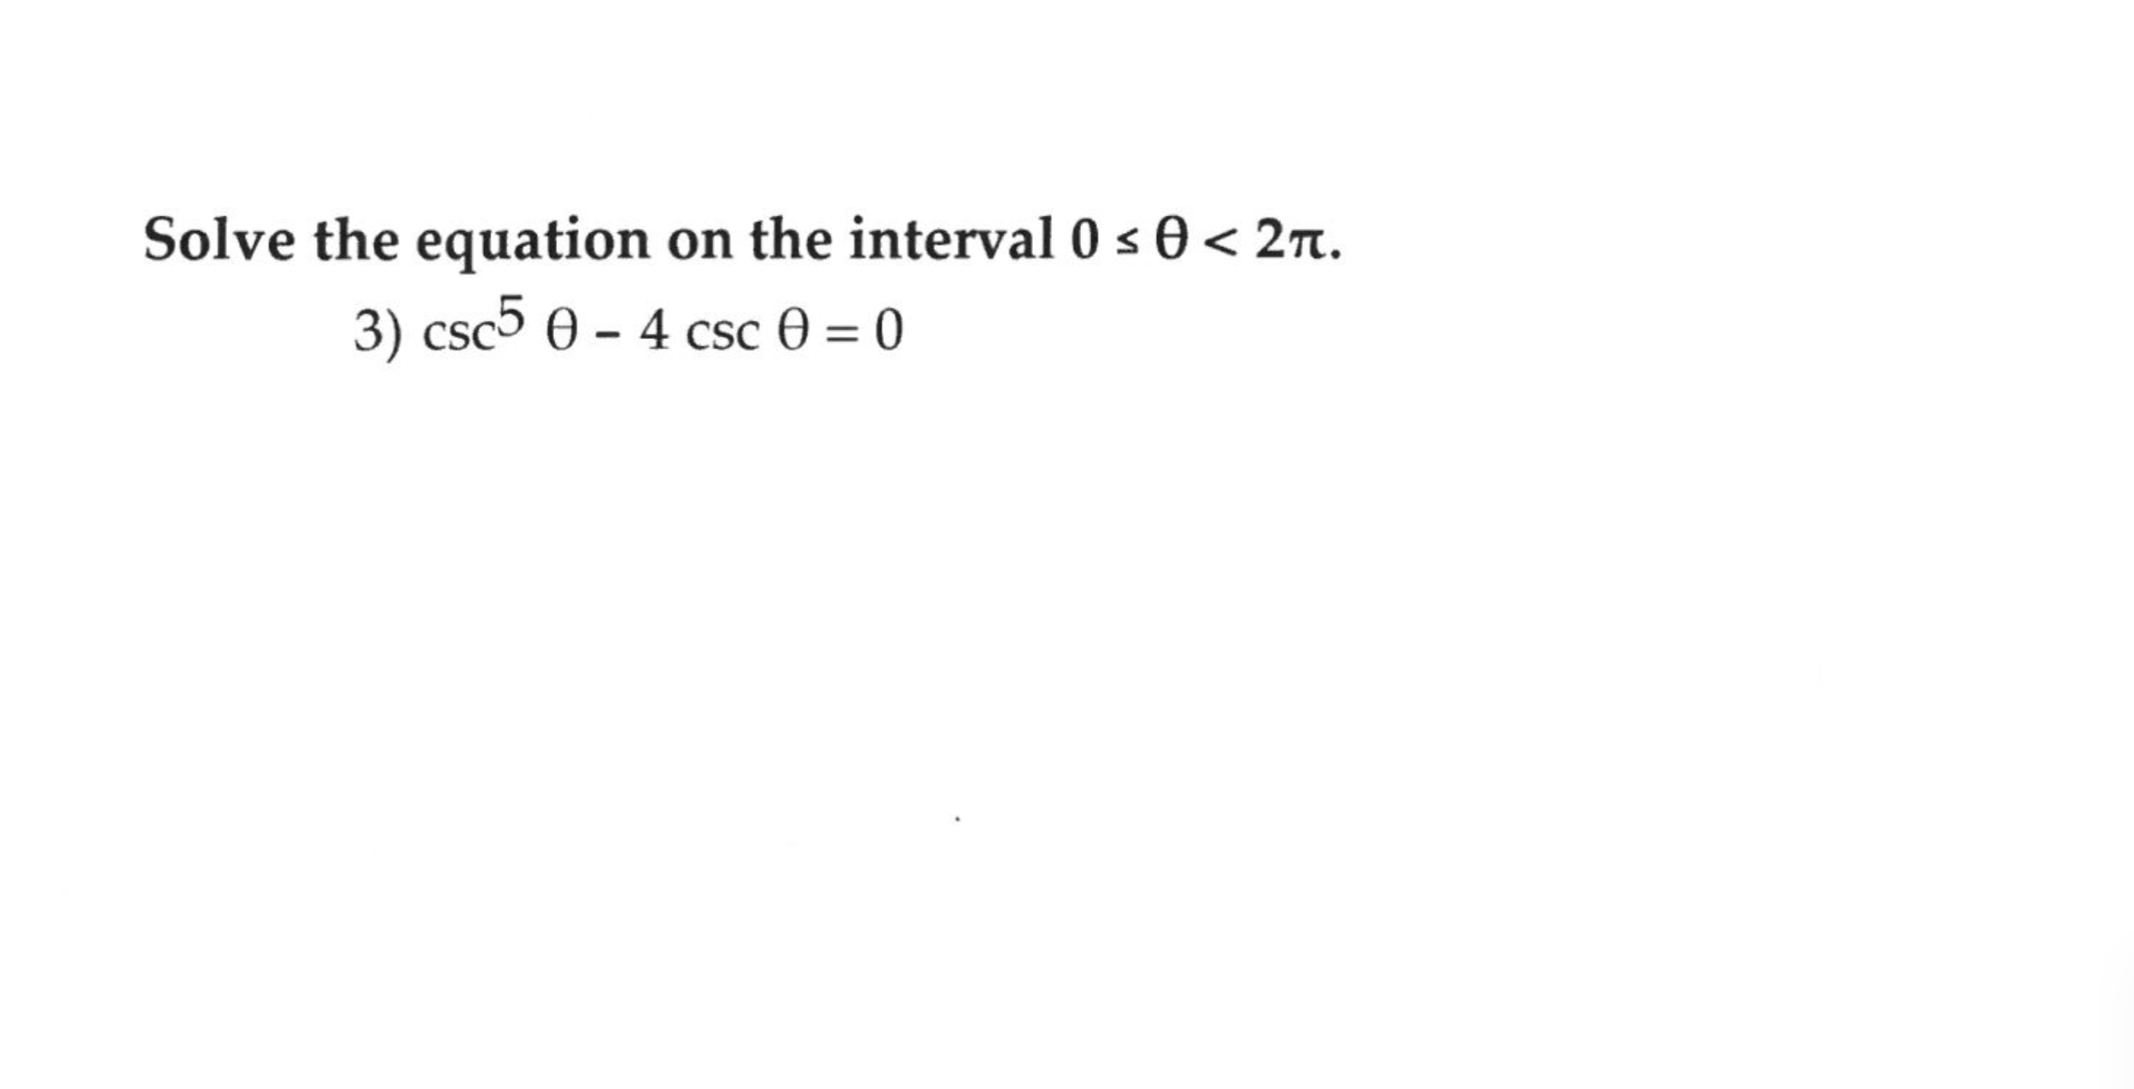 Solve the equation on the interval 0 < 0 < 2n.
3) csc5 0 – 4 csc 0 = 0
